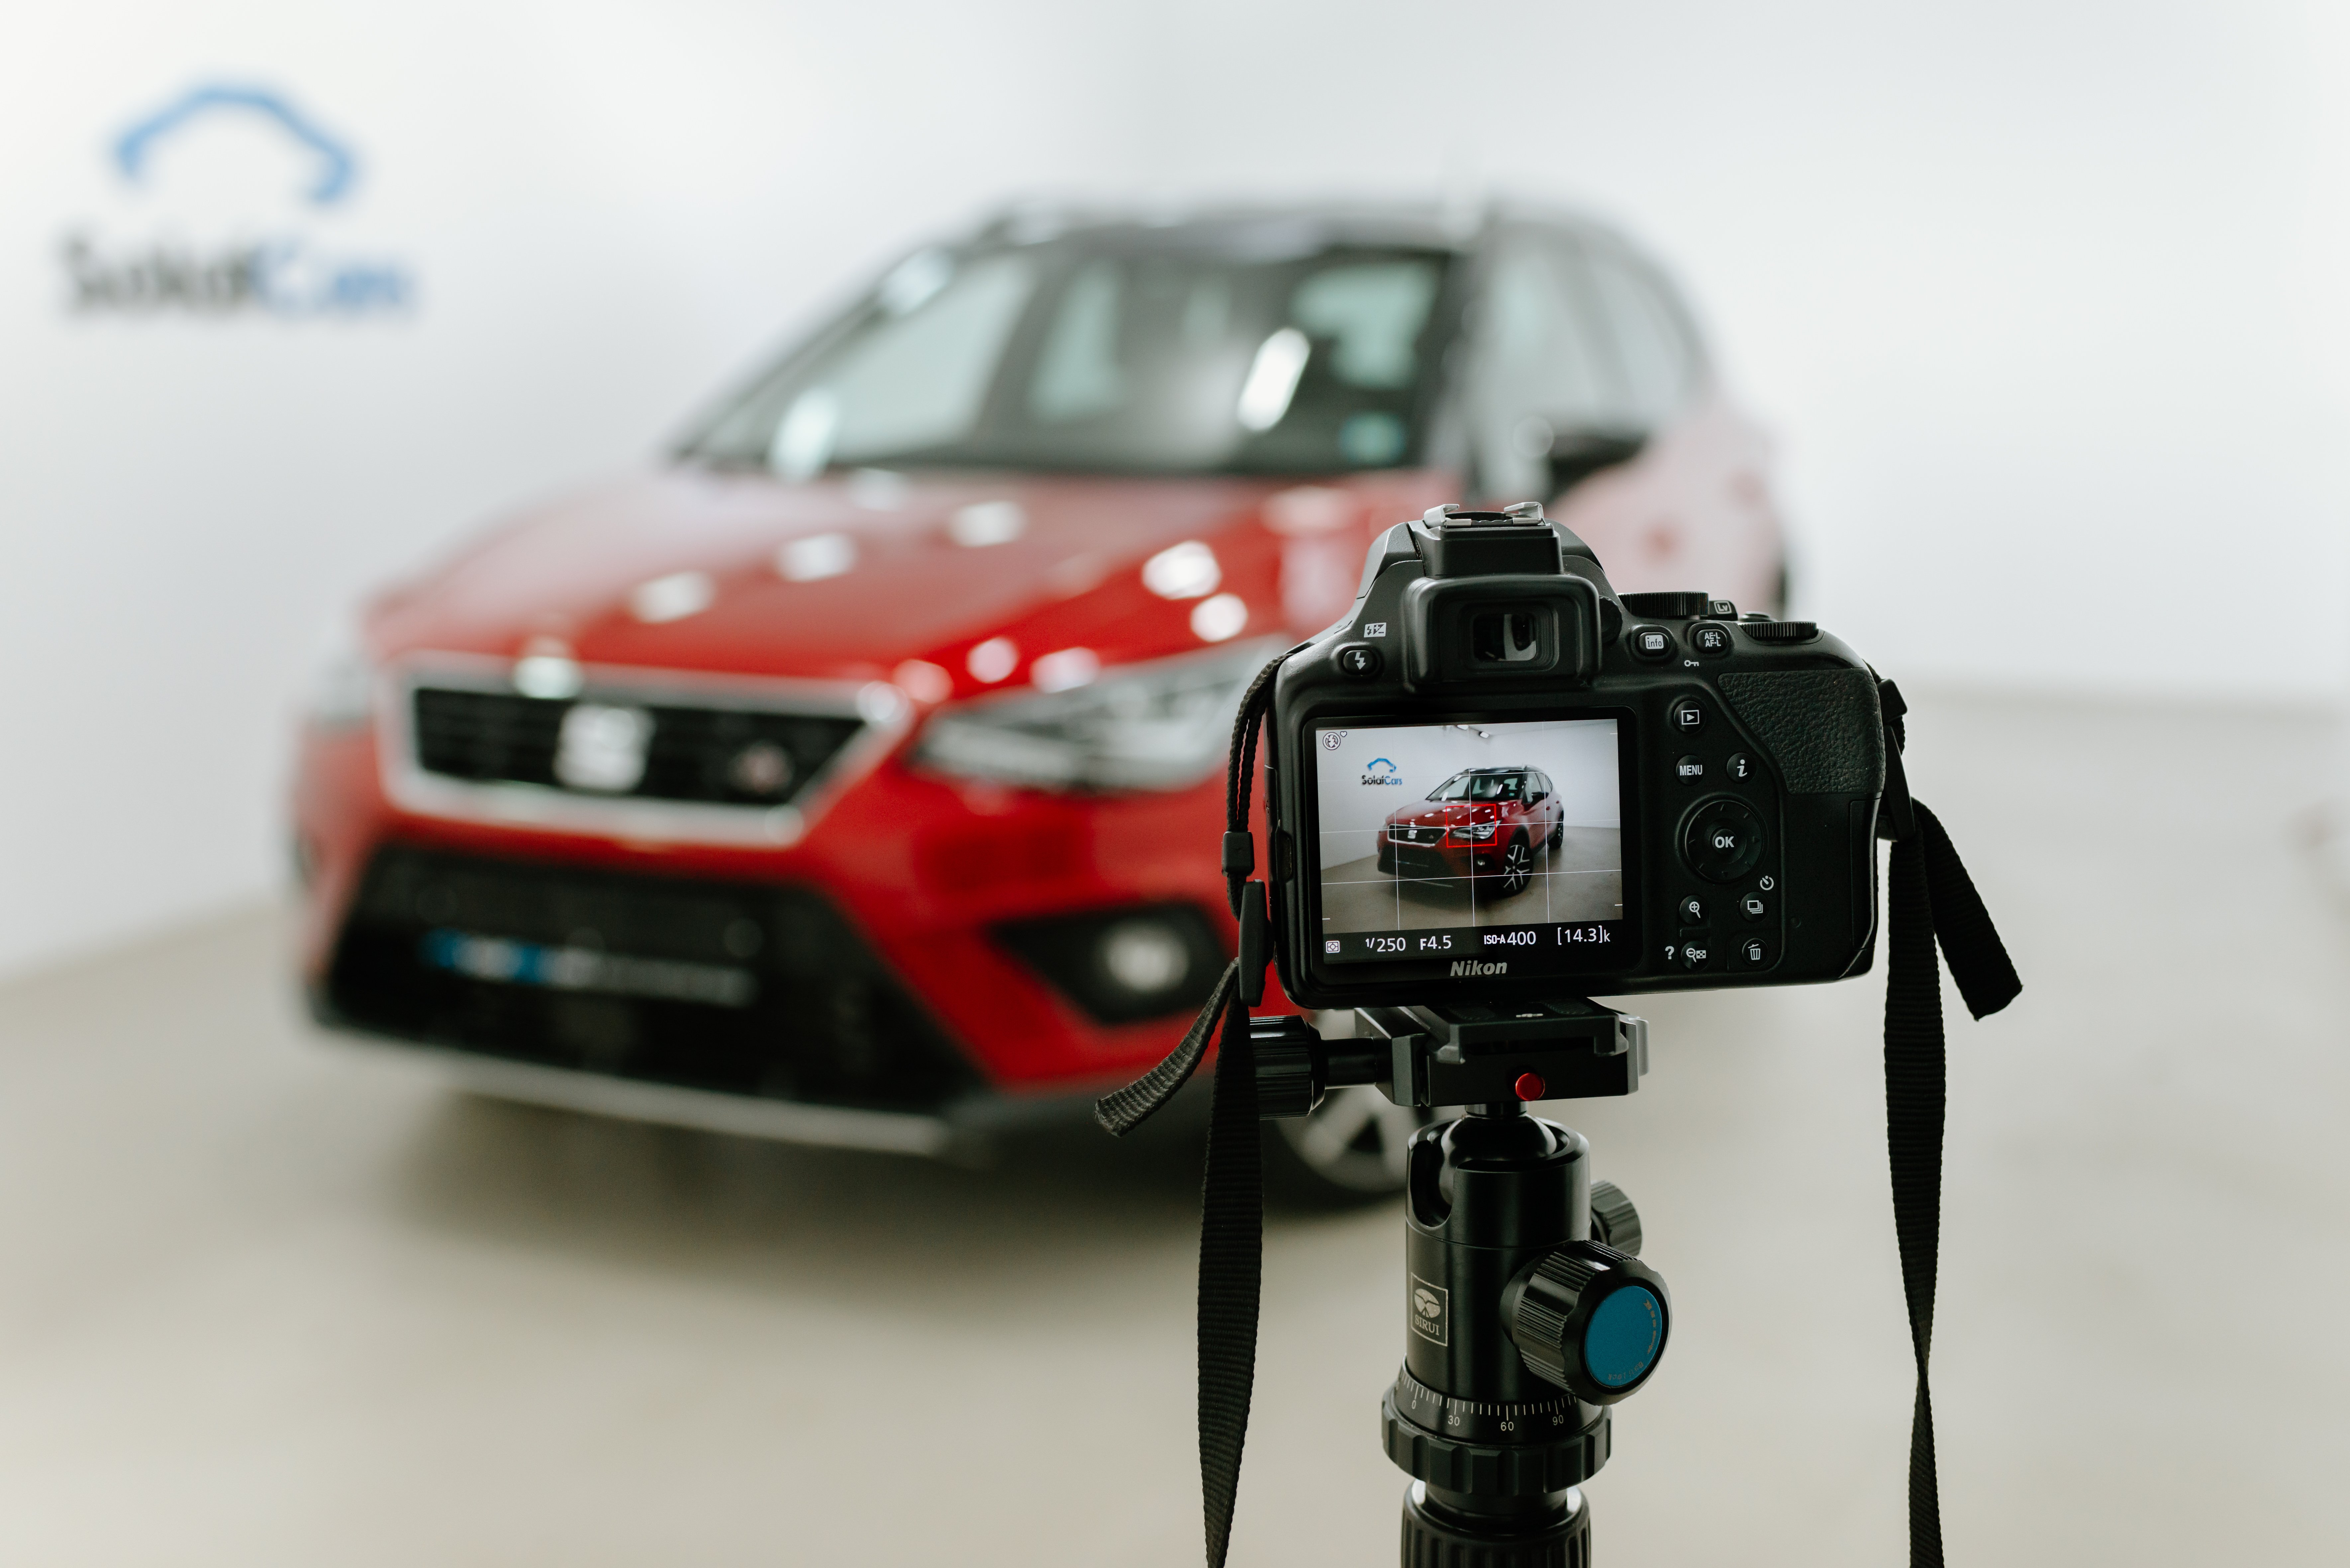 Dslr professional camera placed on a tripod in front of a red car